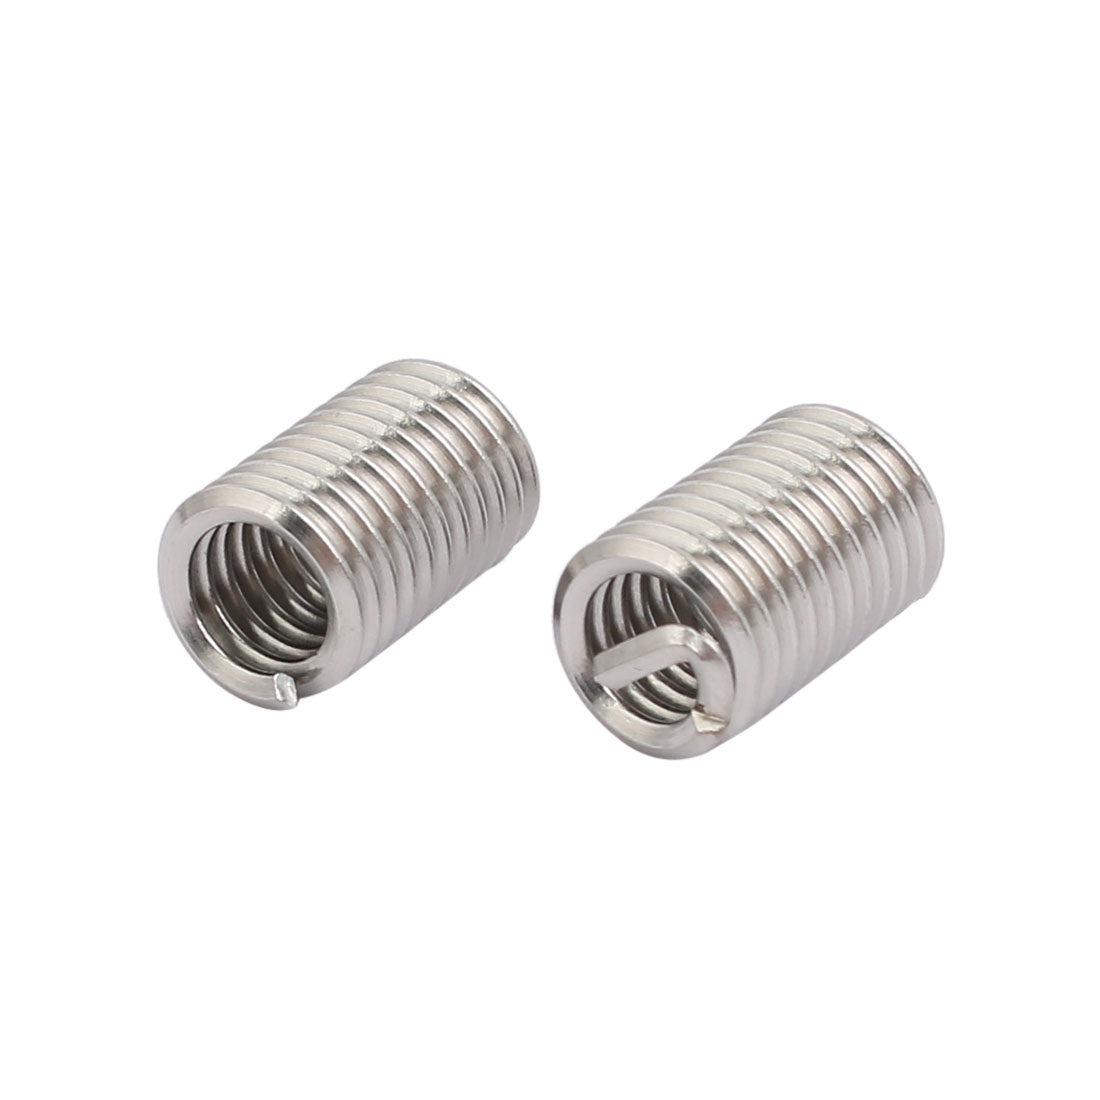 uxcell Uxcell 1/4-20x0.625" 304 Stainless Steel Helical Coil Wire Thread Insert 12pcs